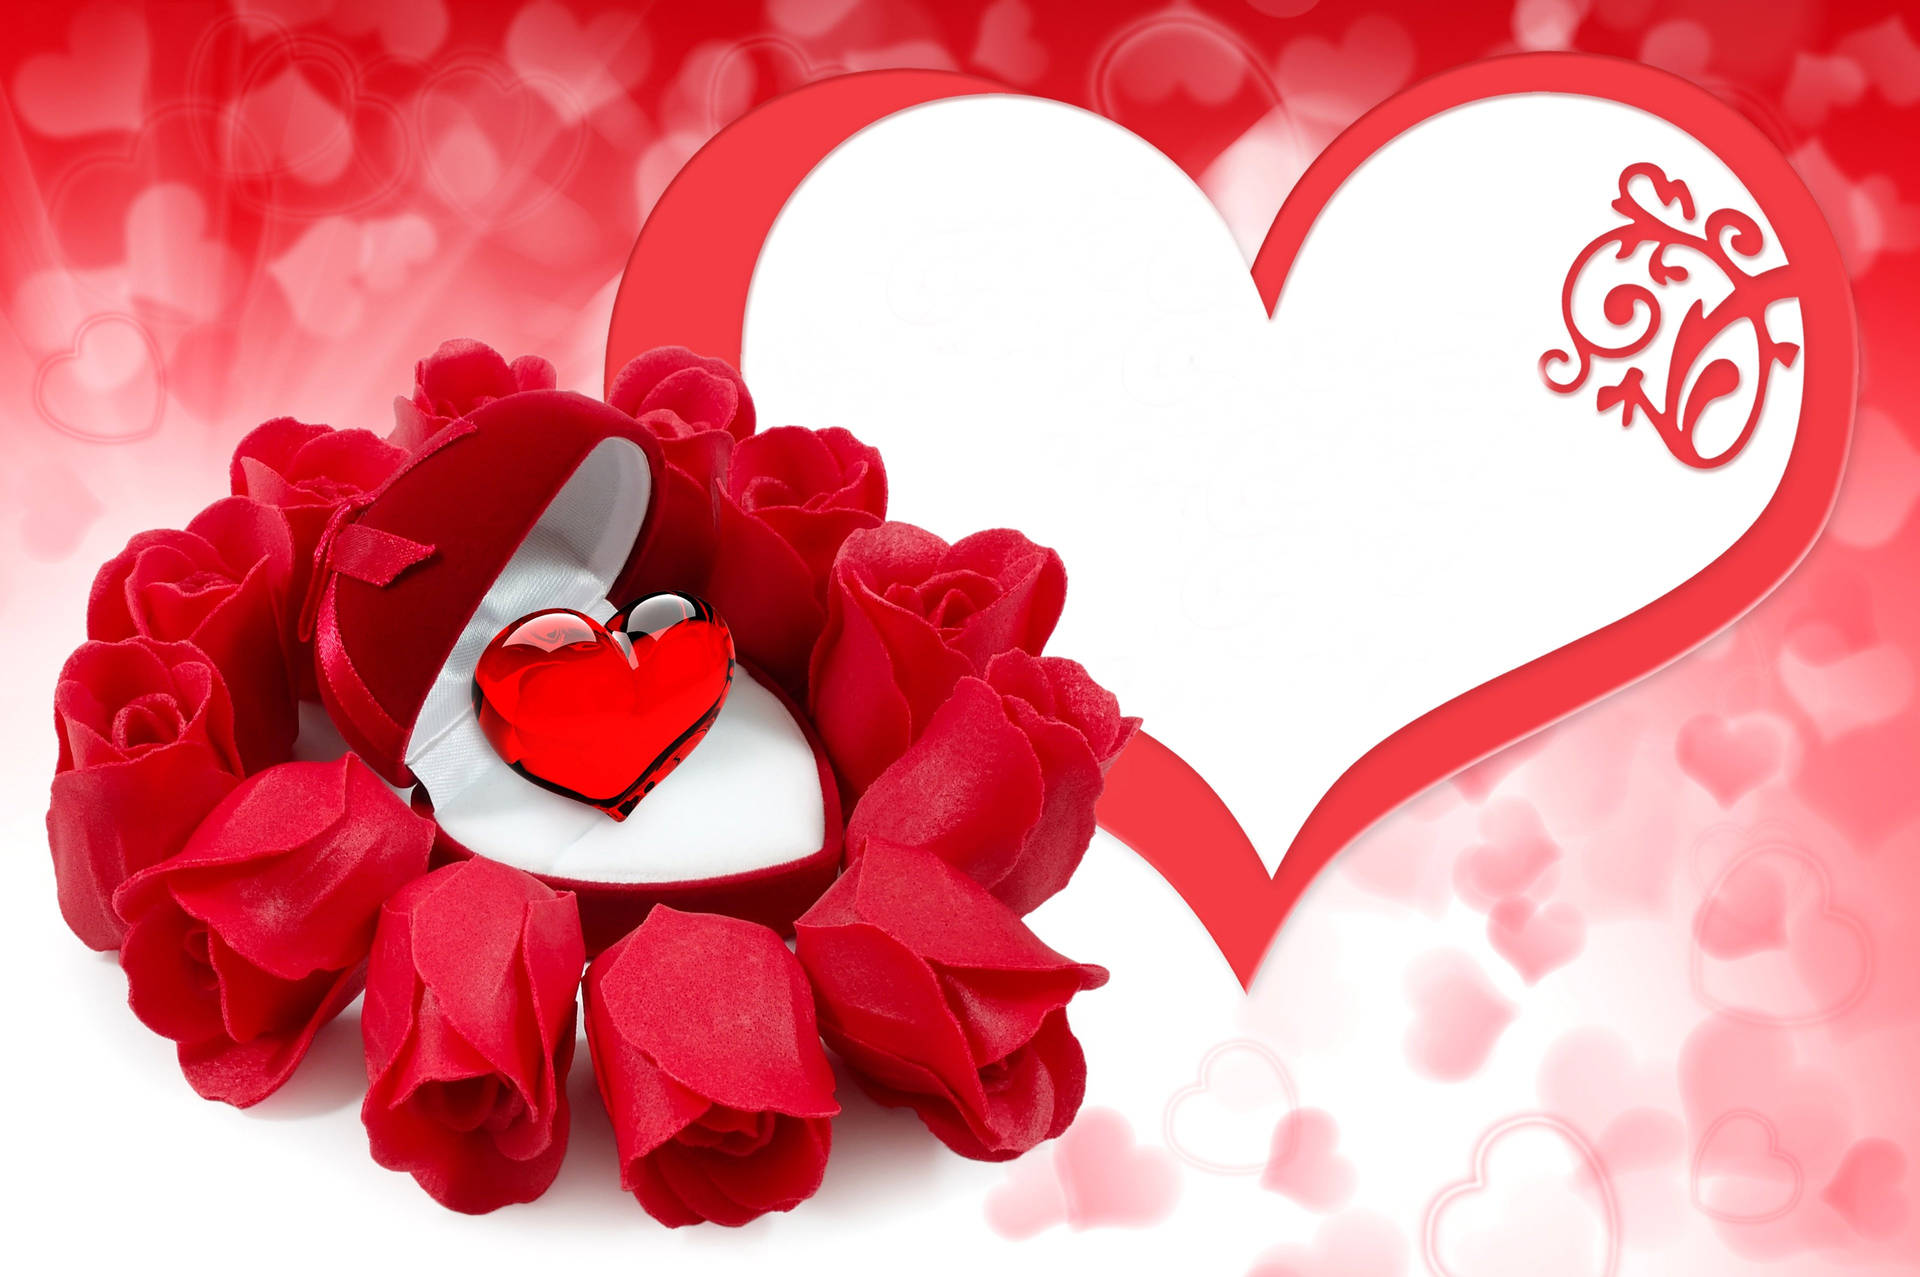 503983 Romantic, Red Rose, Heart - Rare Gallery HD Wallpapers